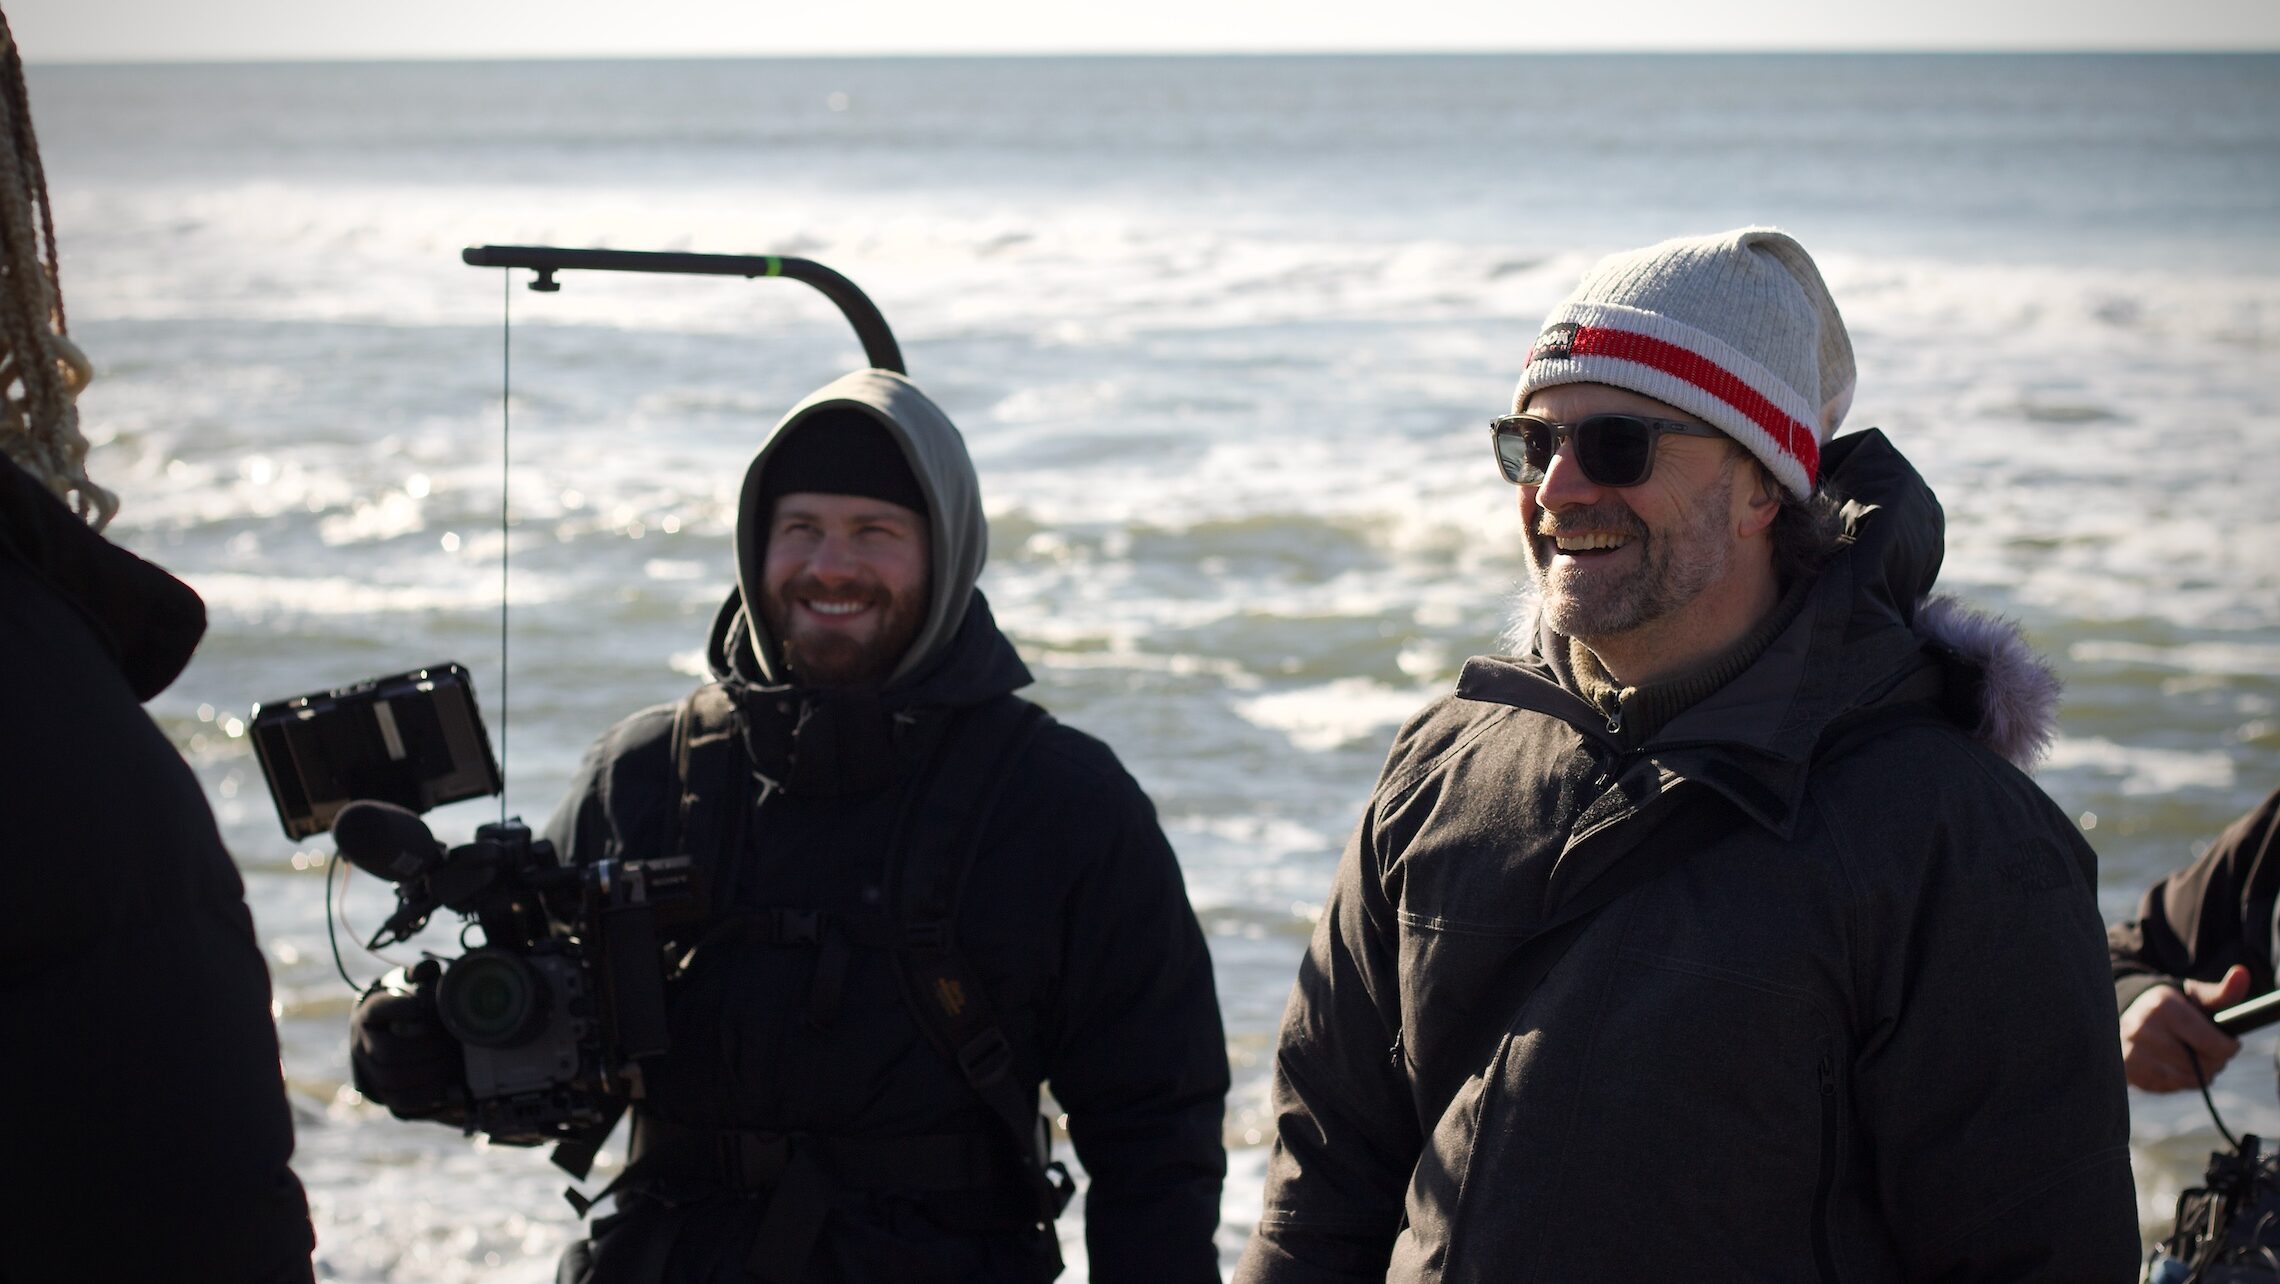 director and cameraman stand together laughing with on camera participants on beach, ocean in background